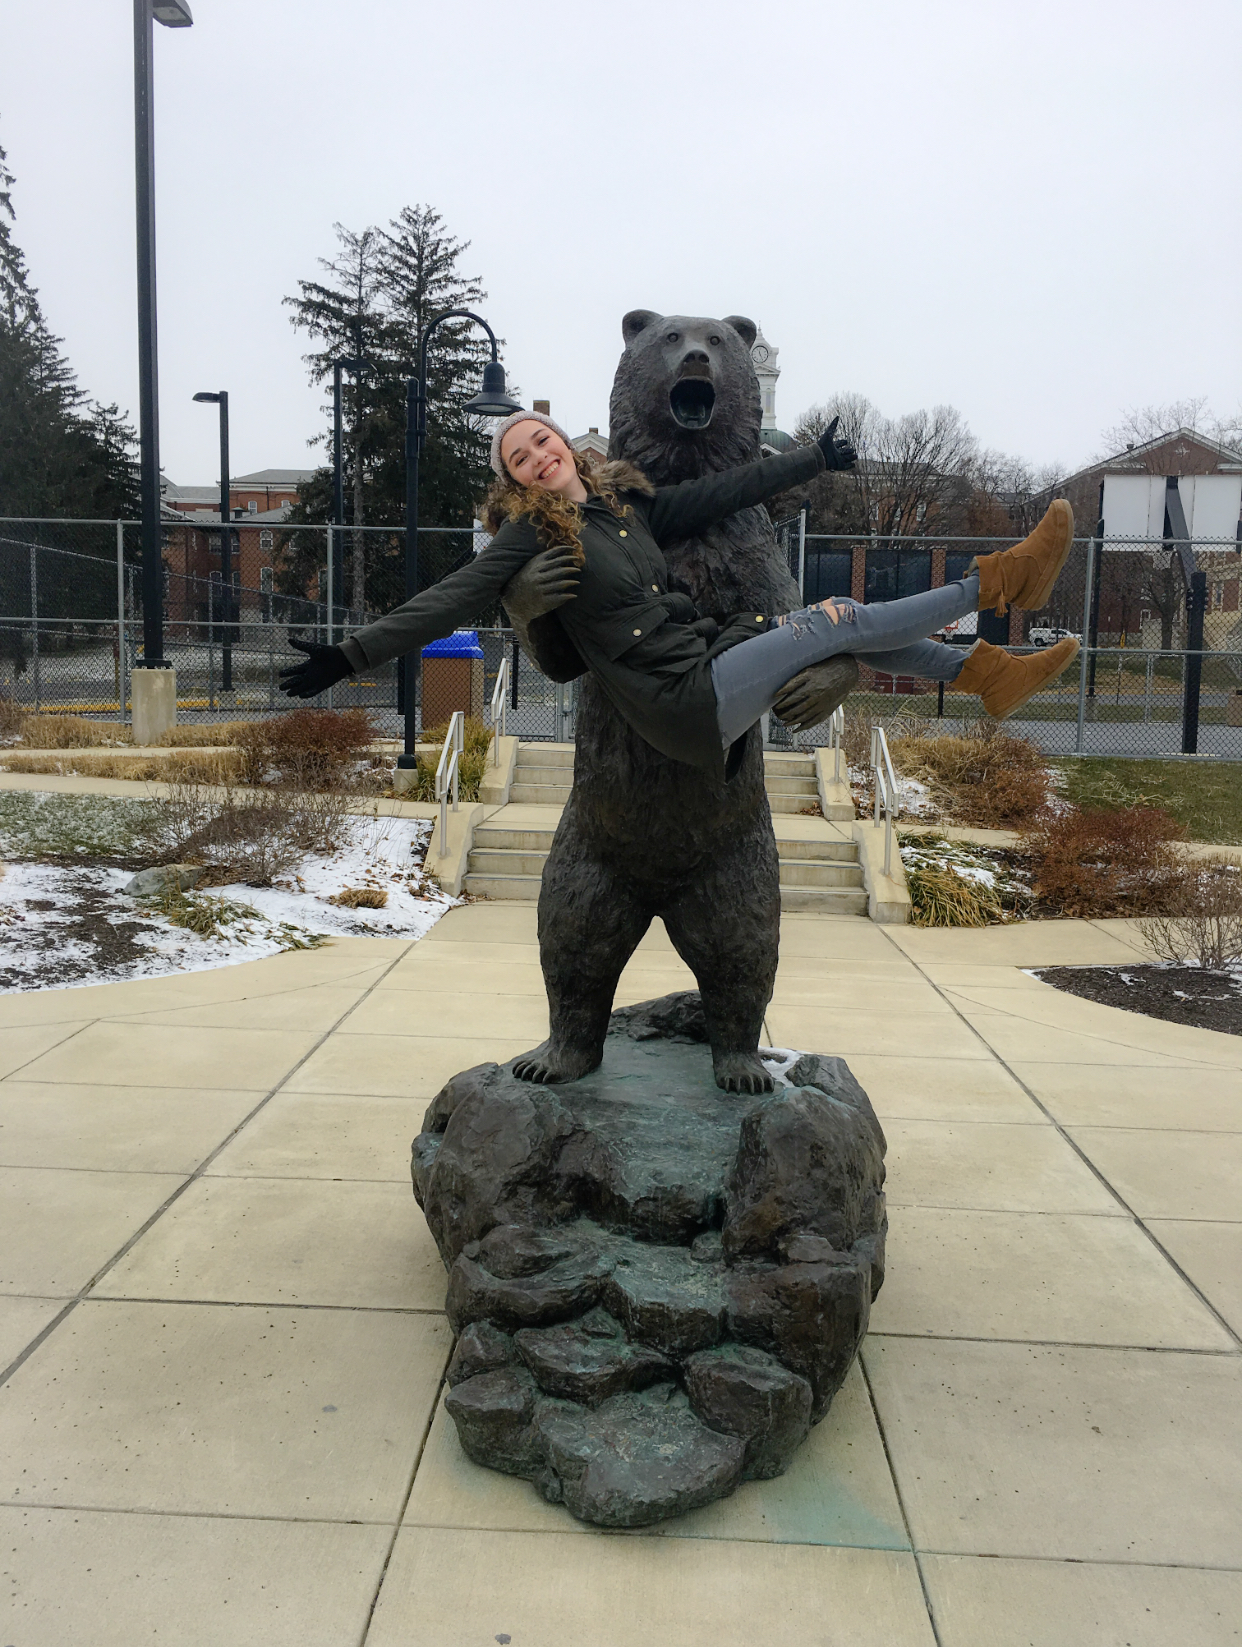 Karley Pedrick in the arms of the golden bear statue